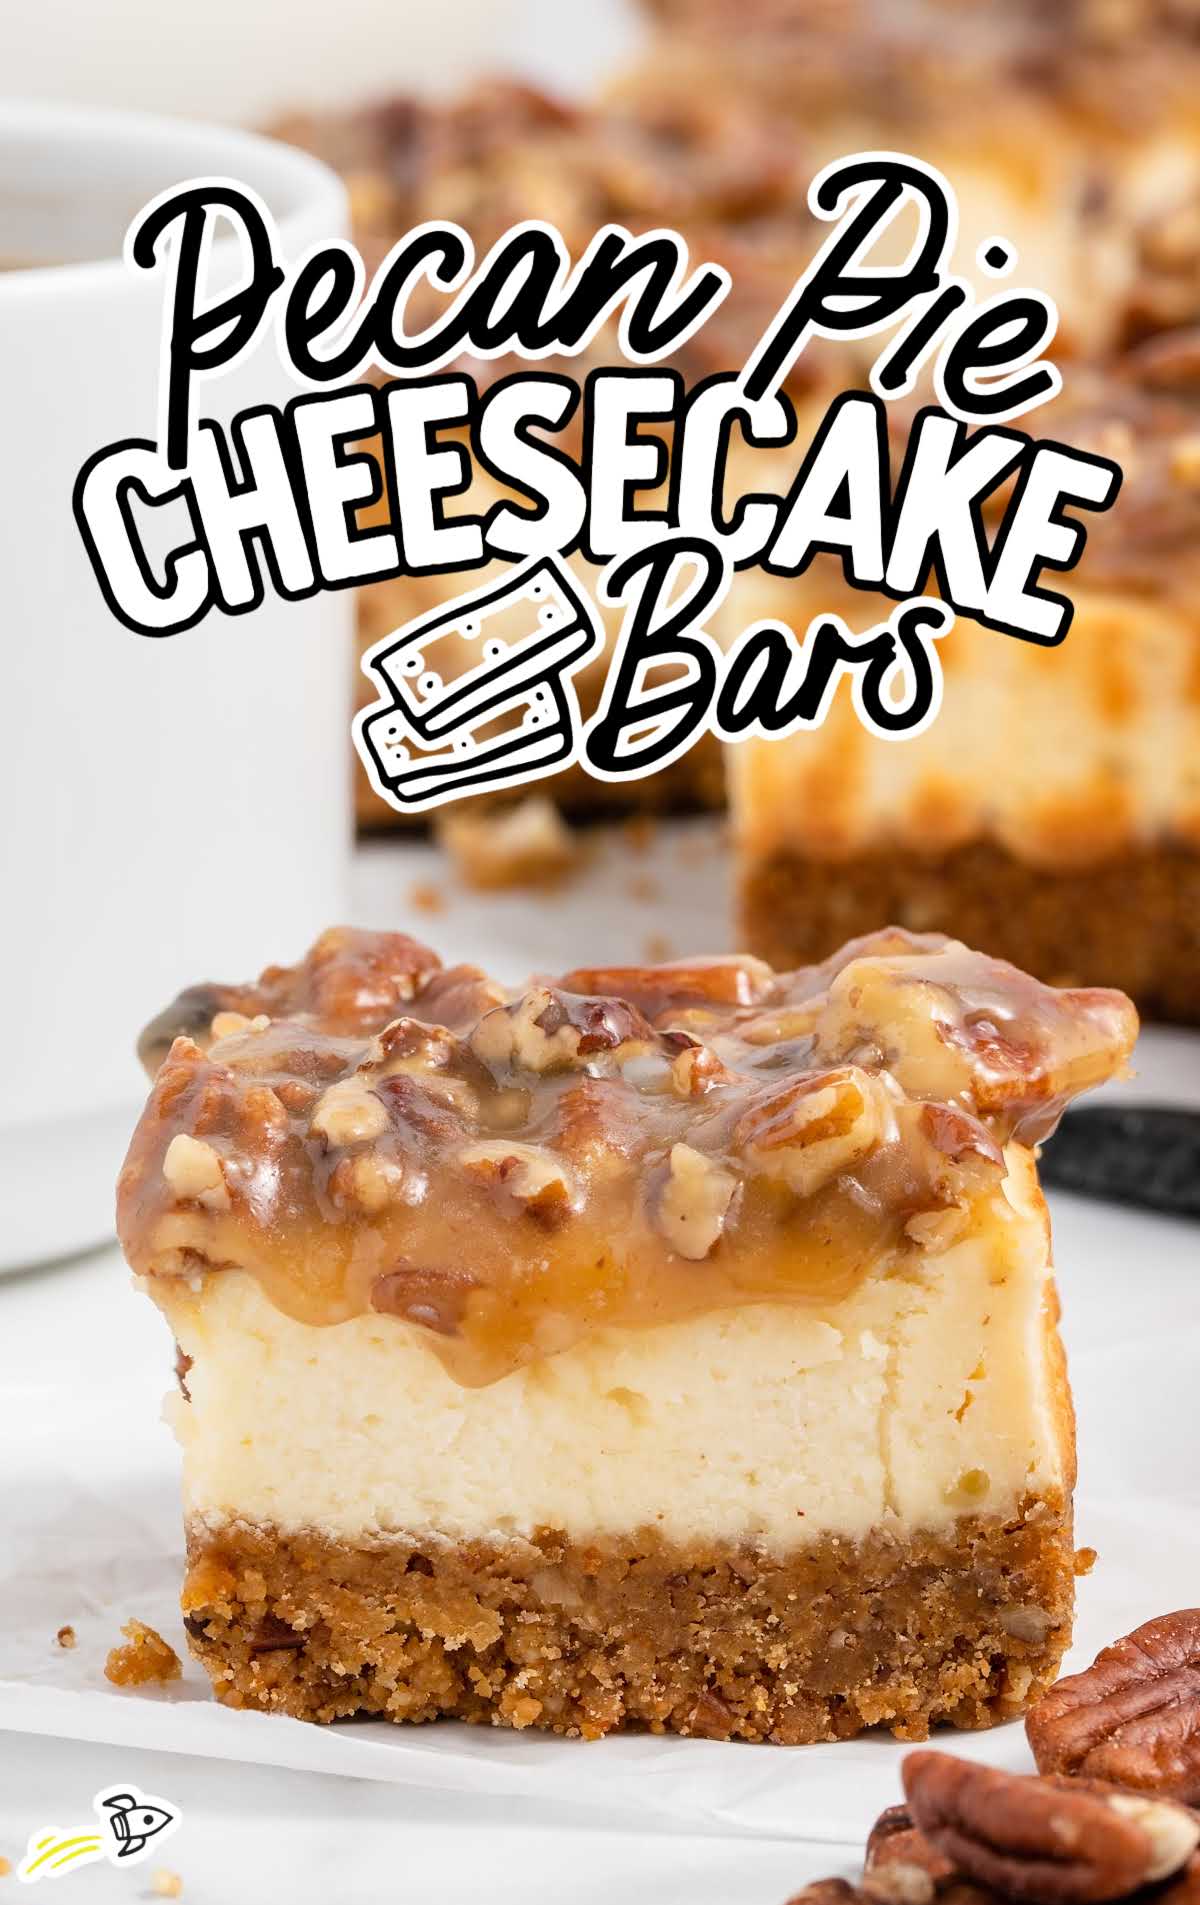 a close up shot of a slice of Pecan Pie Cheesecake Bar